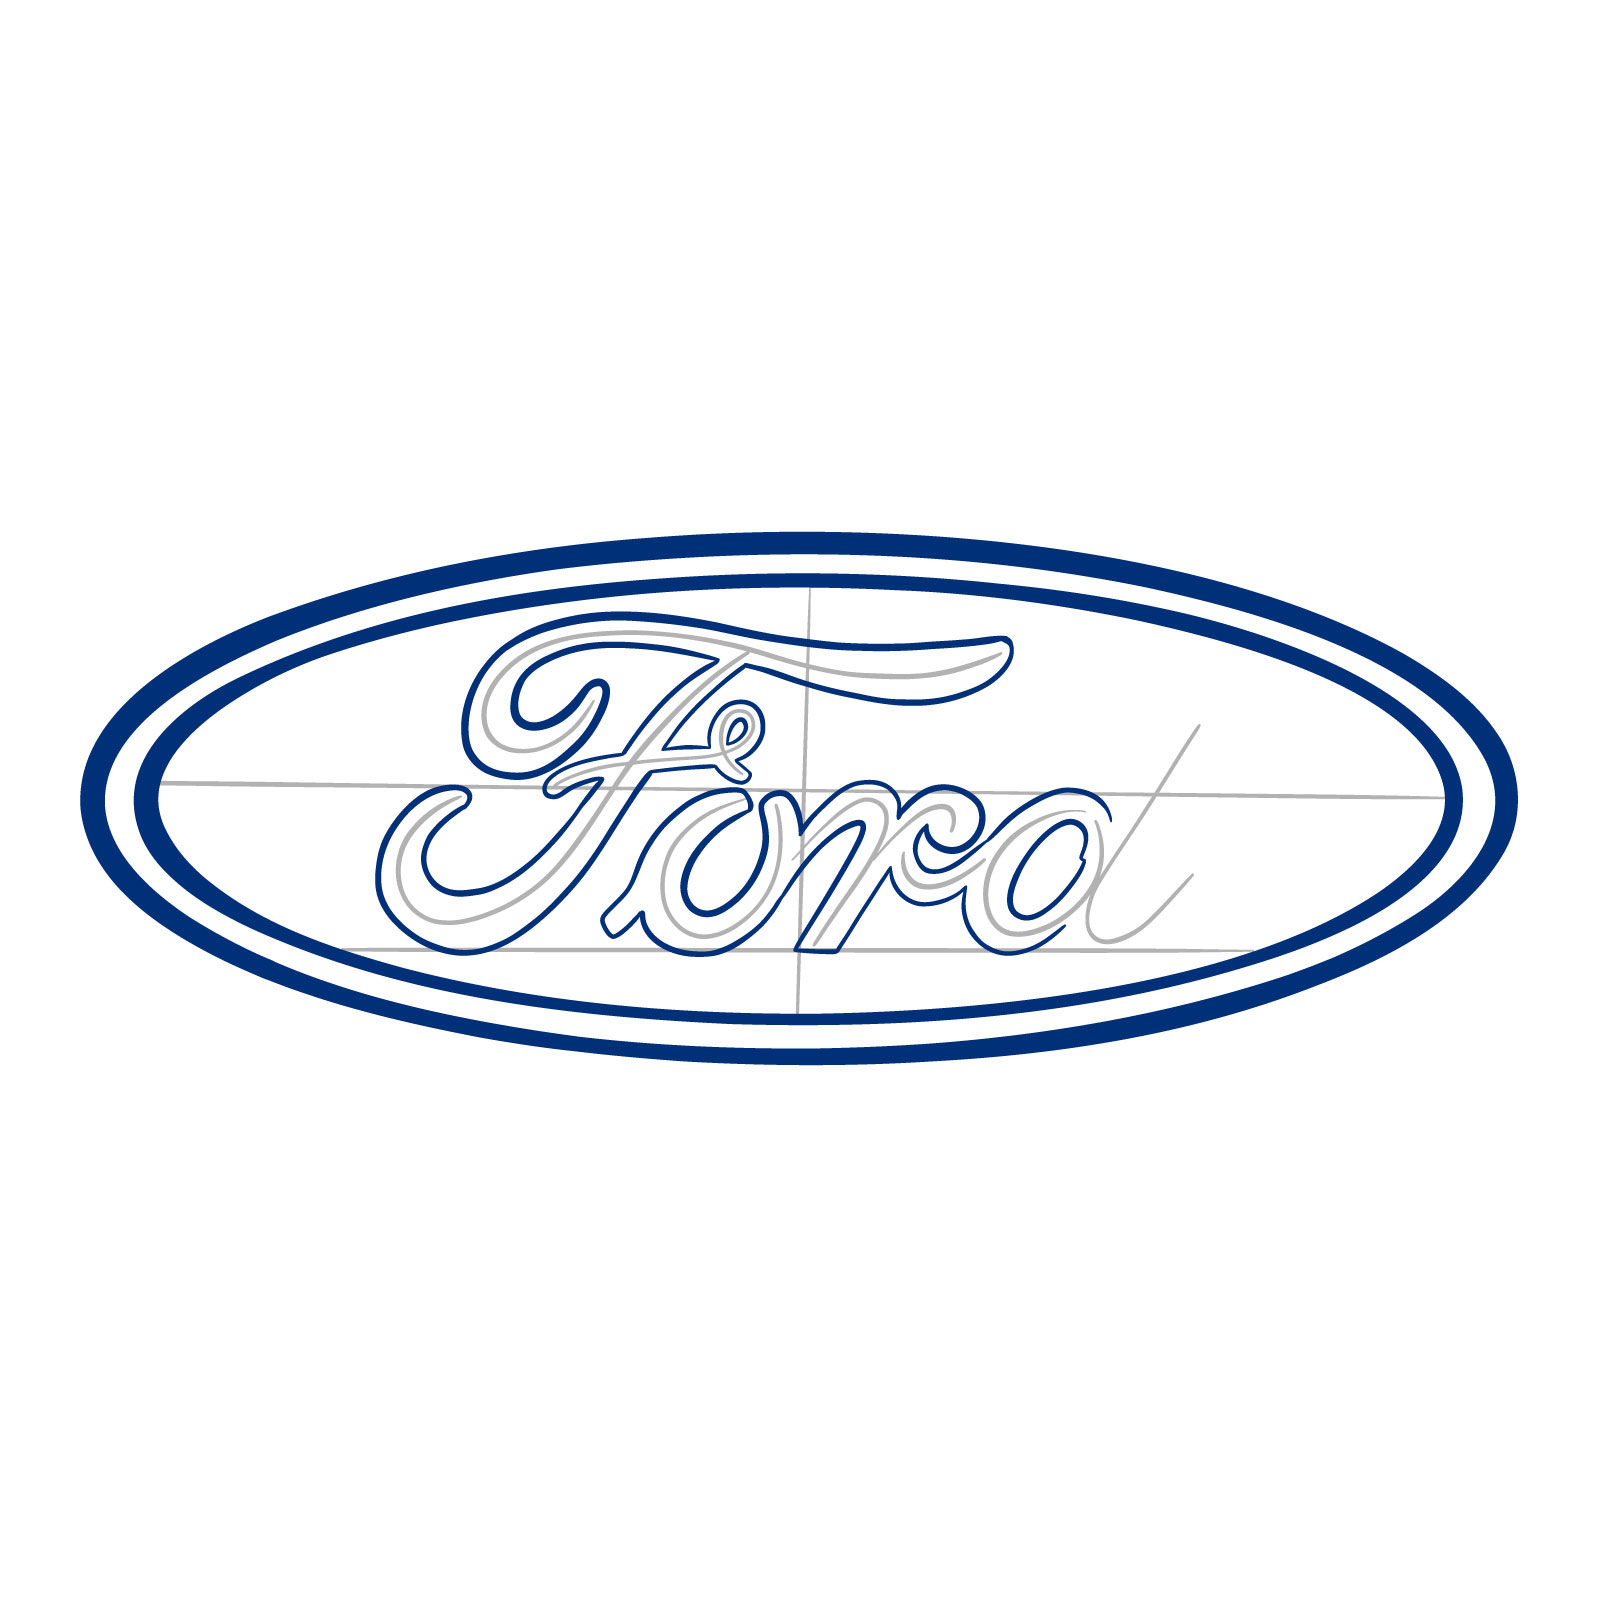 How to draw the Ford logo - step 13